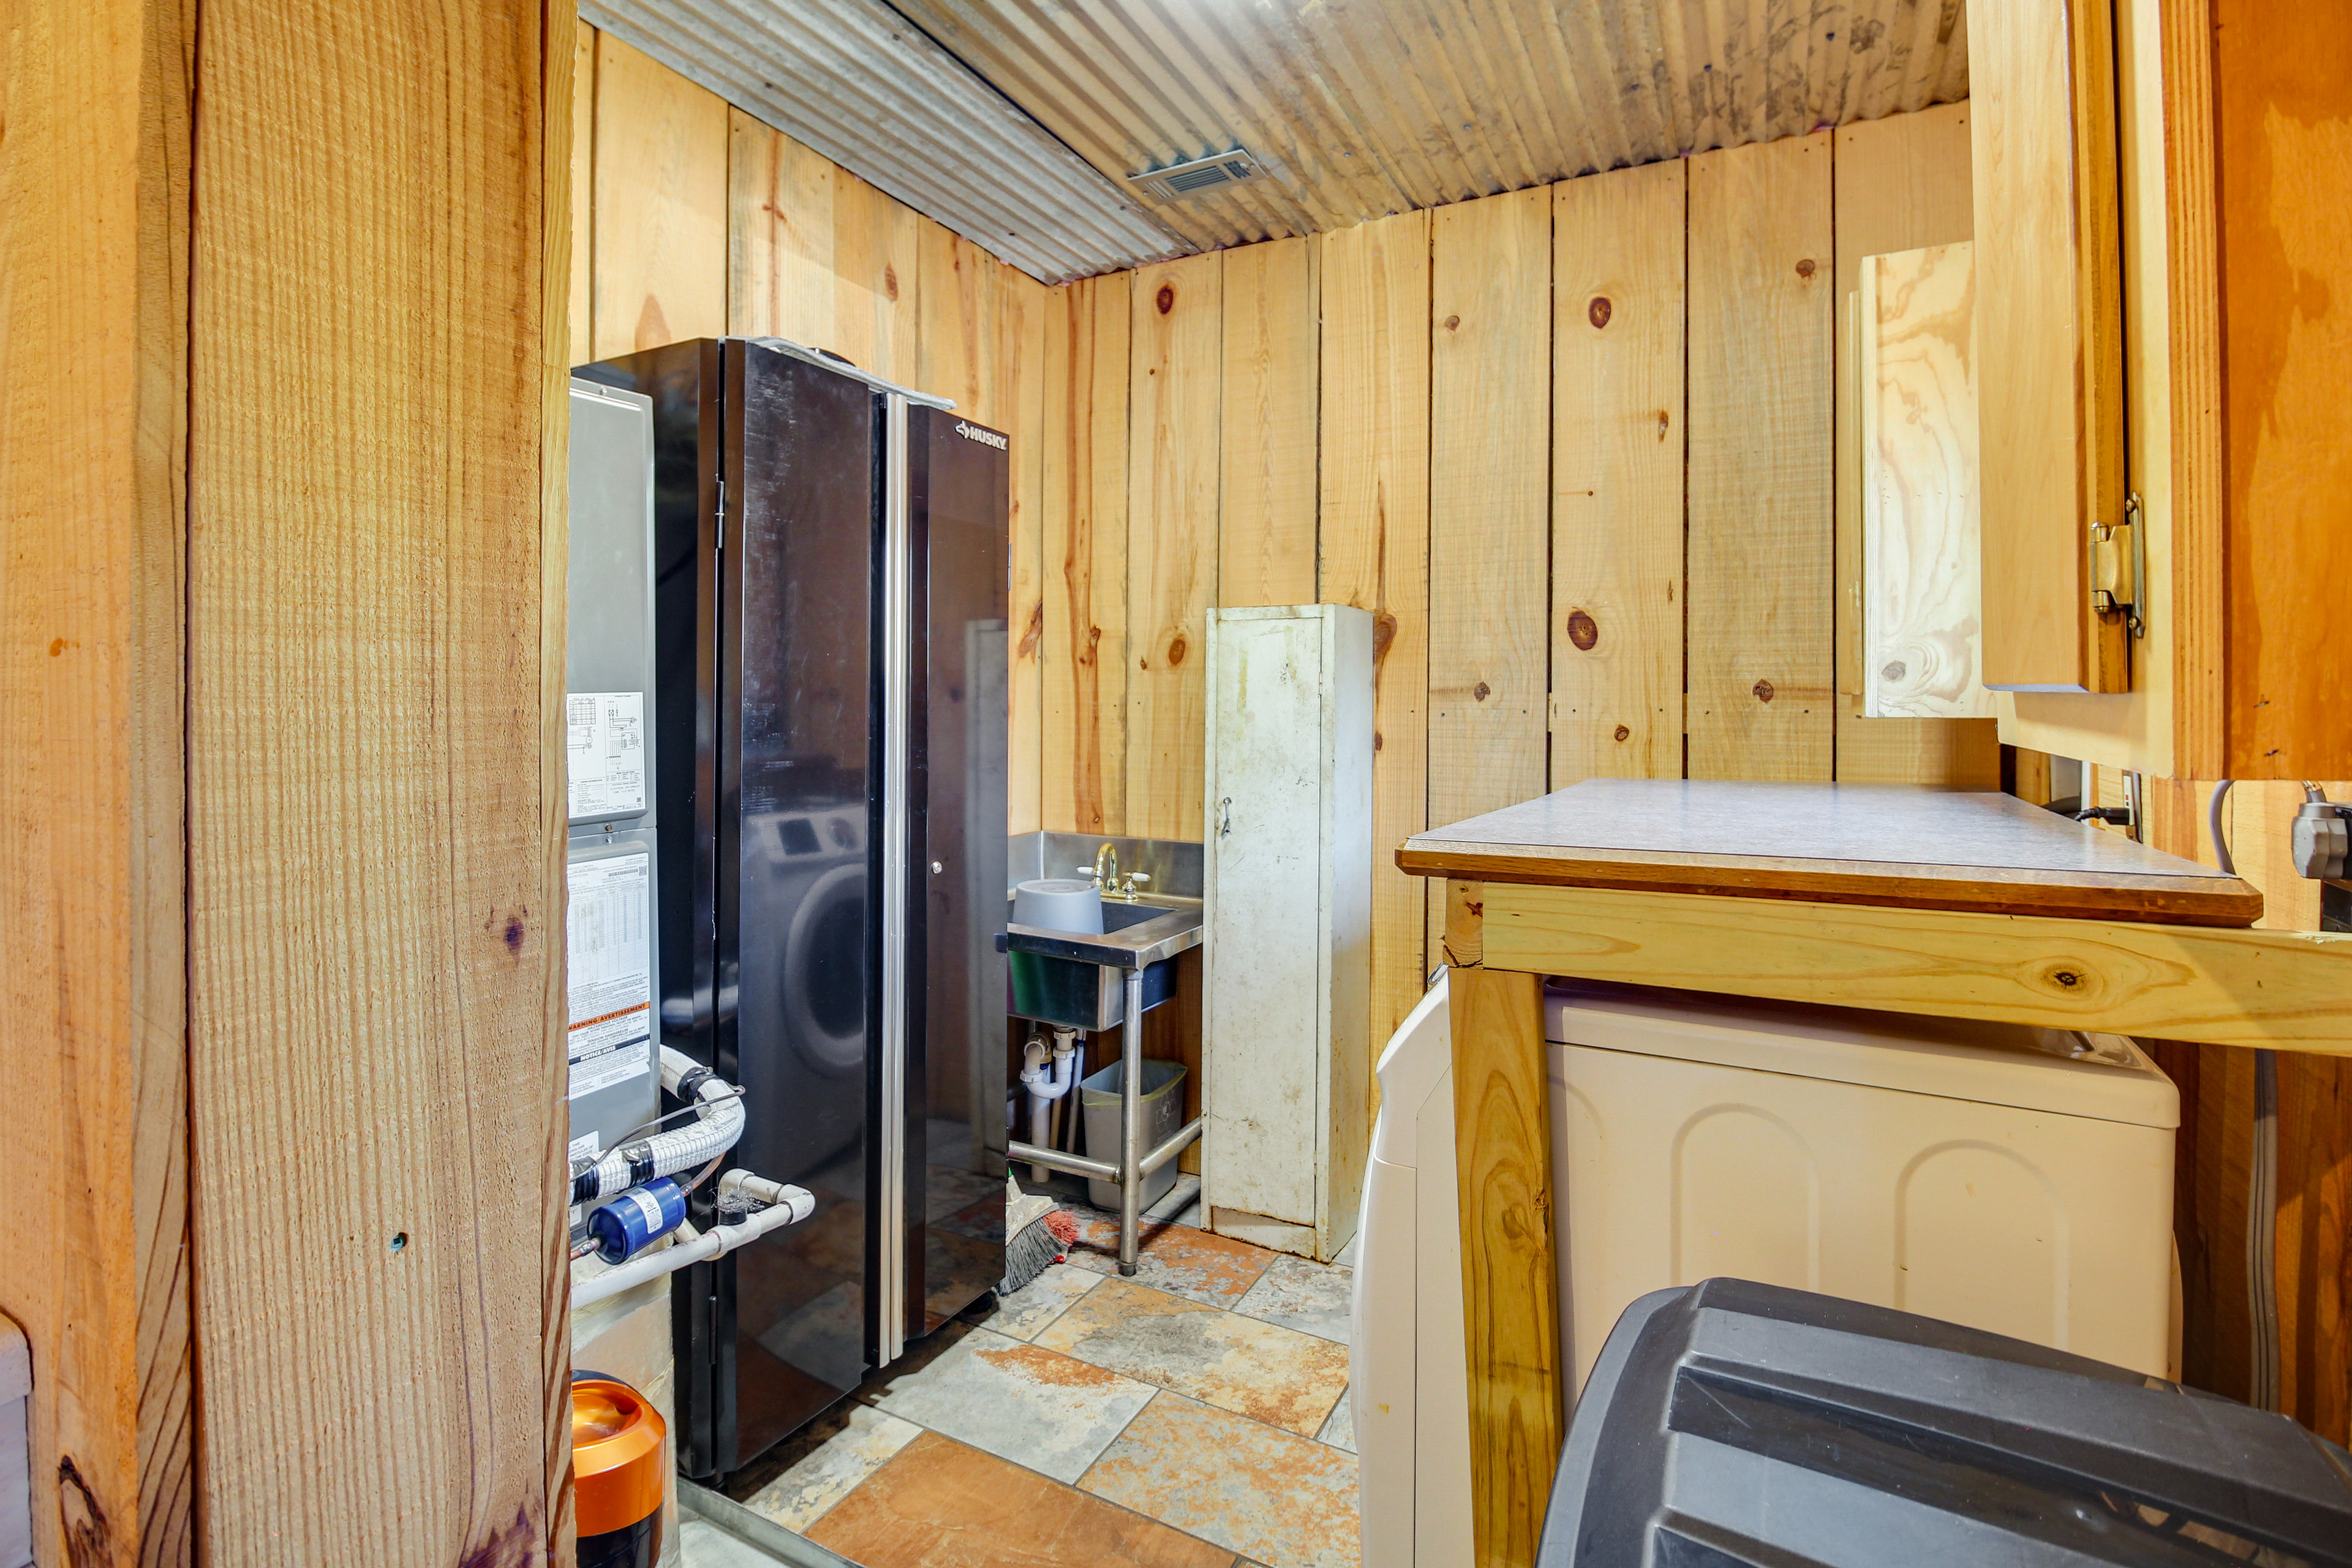 Cozy Summerville Cabin: Private Hot Tub, Fire Pit!